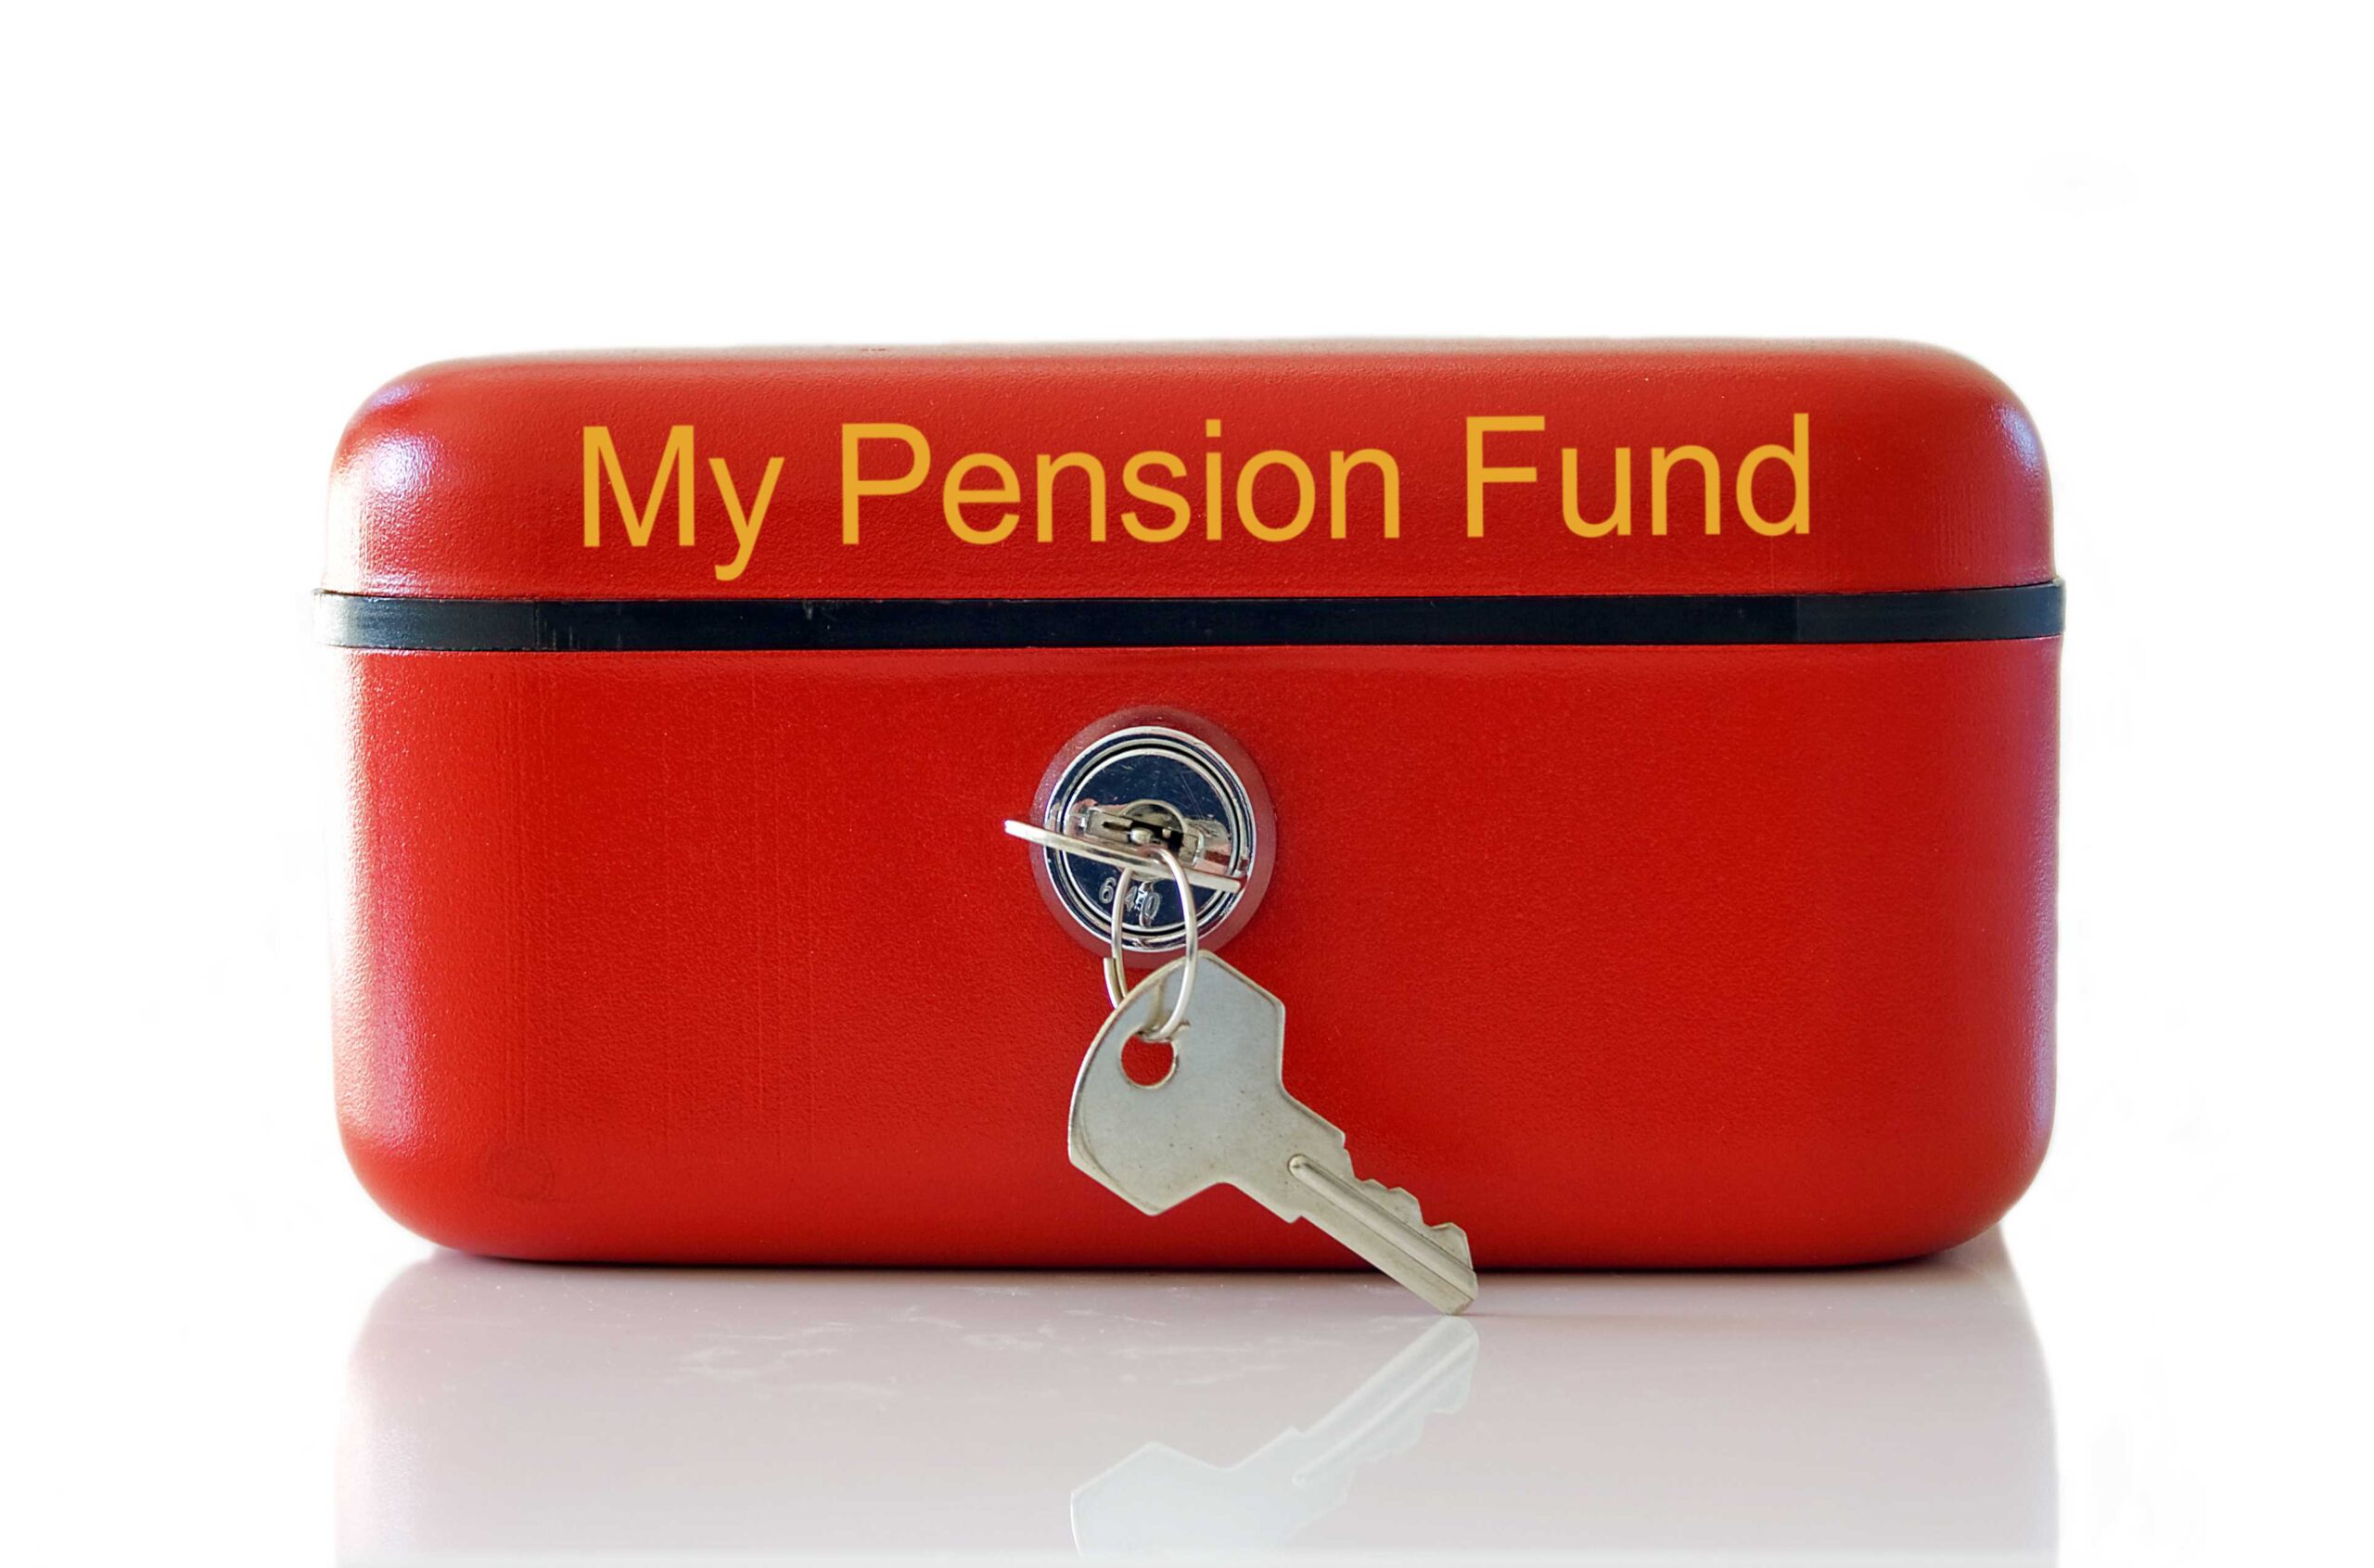 A boost for pension savings